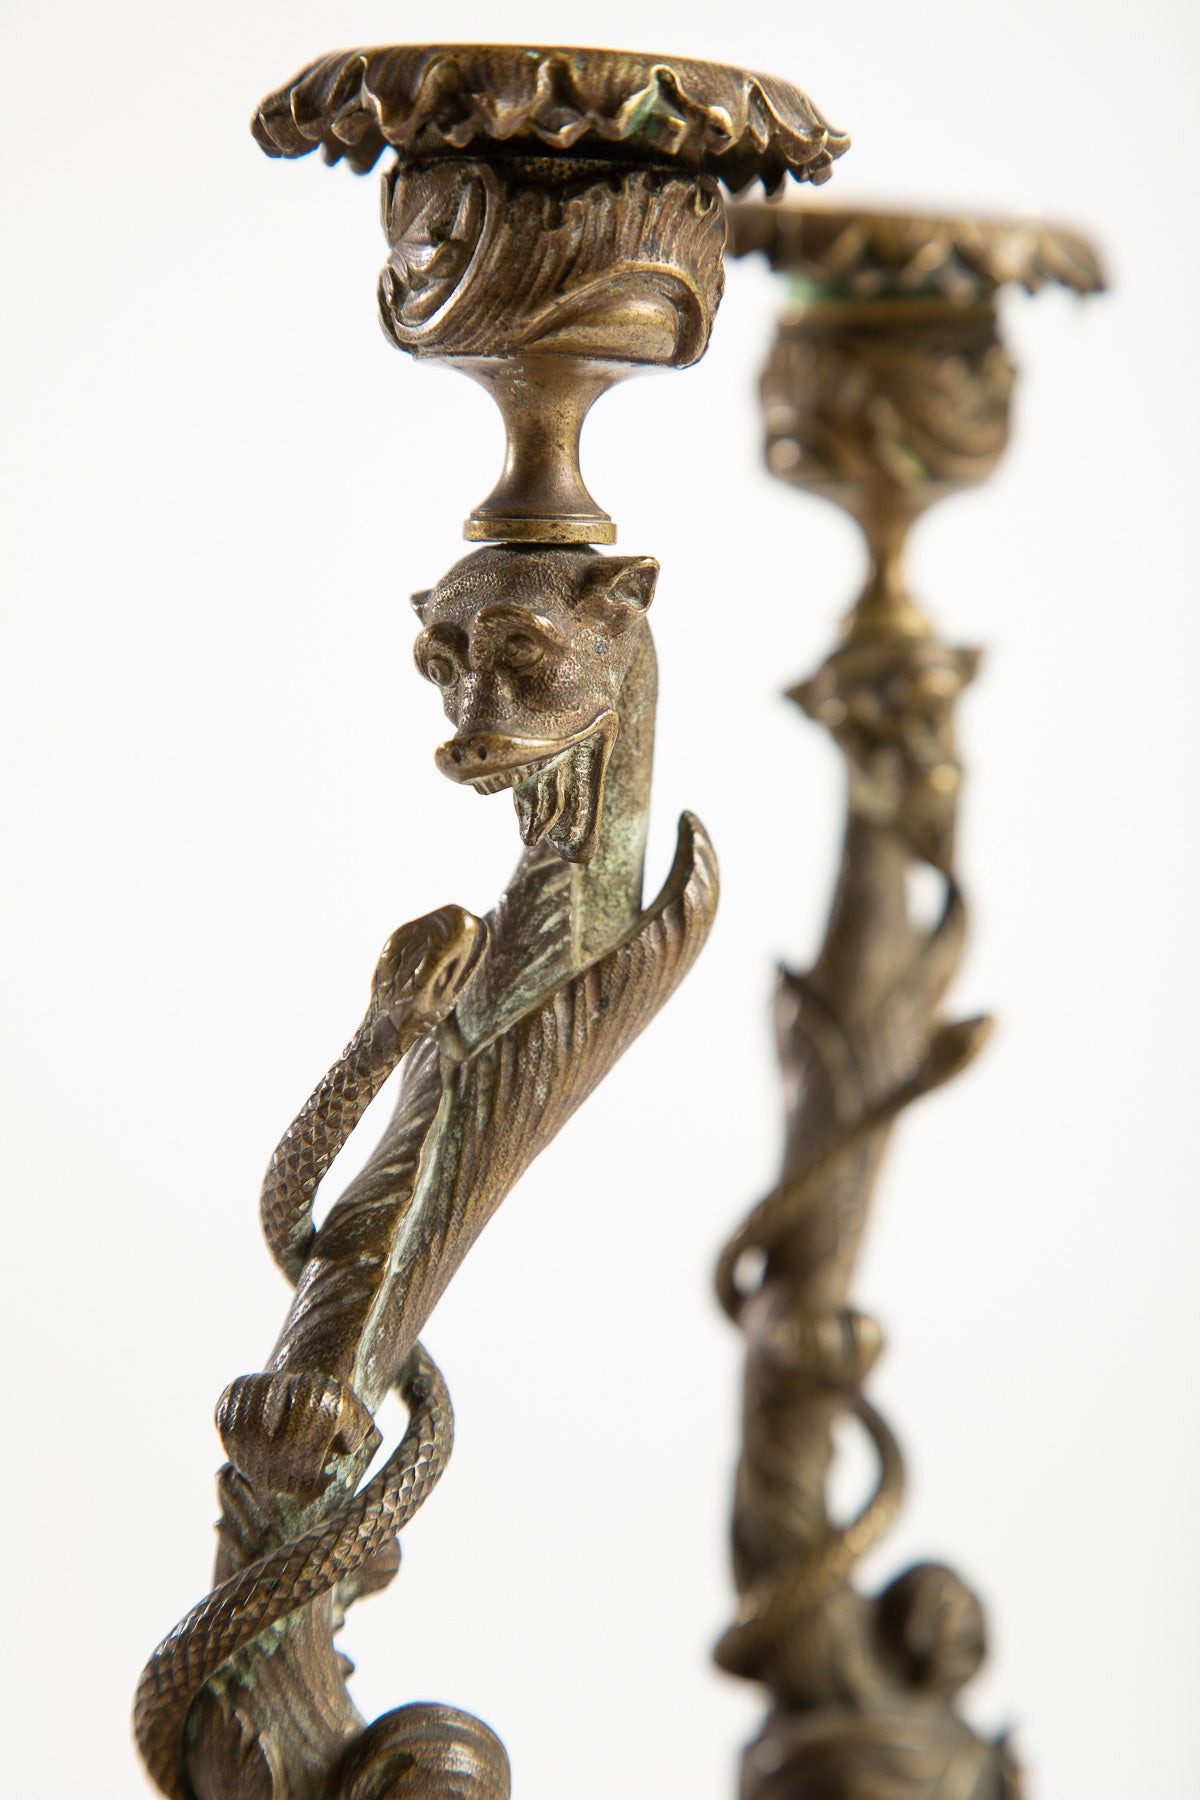 MAXFIELD PRIVATE COLLECTION | PAIR OF DRAGON/SNAKE CANDLESTICKS